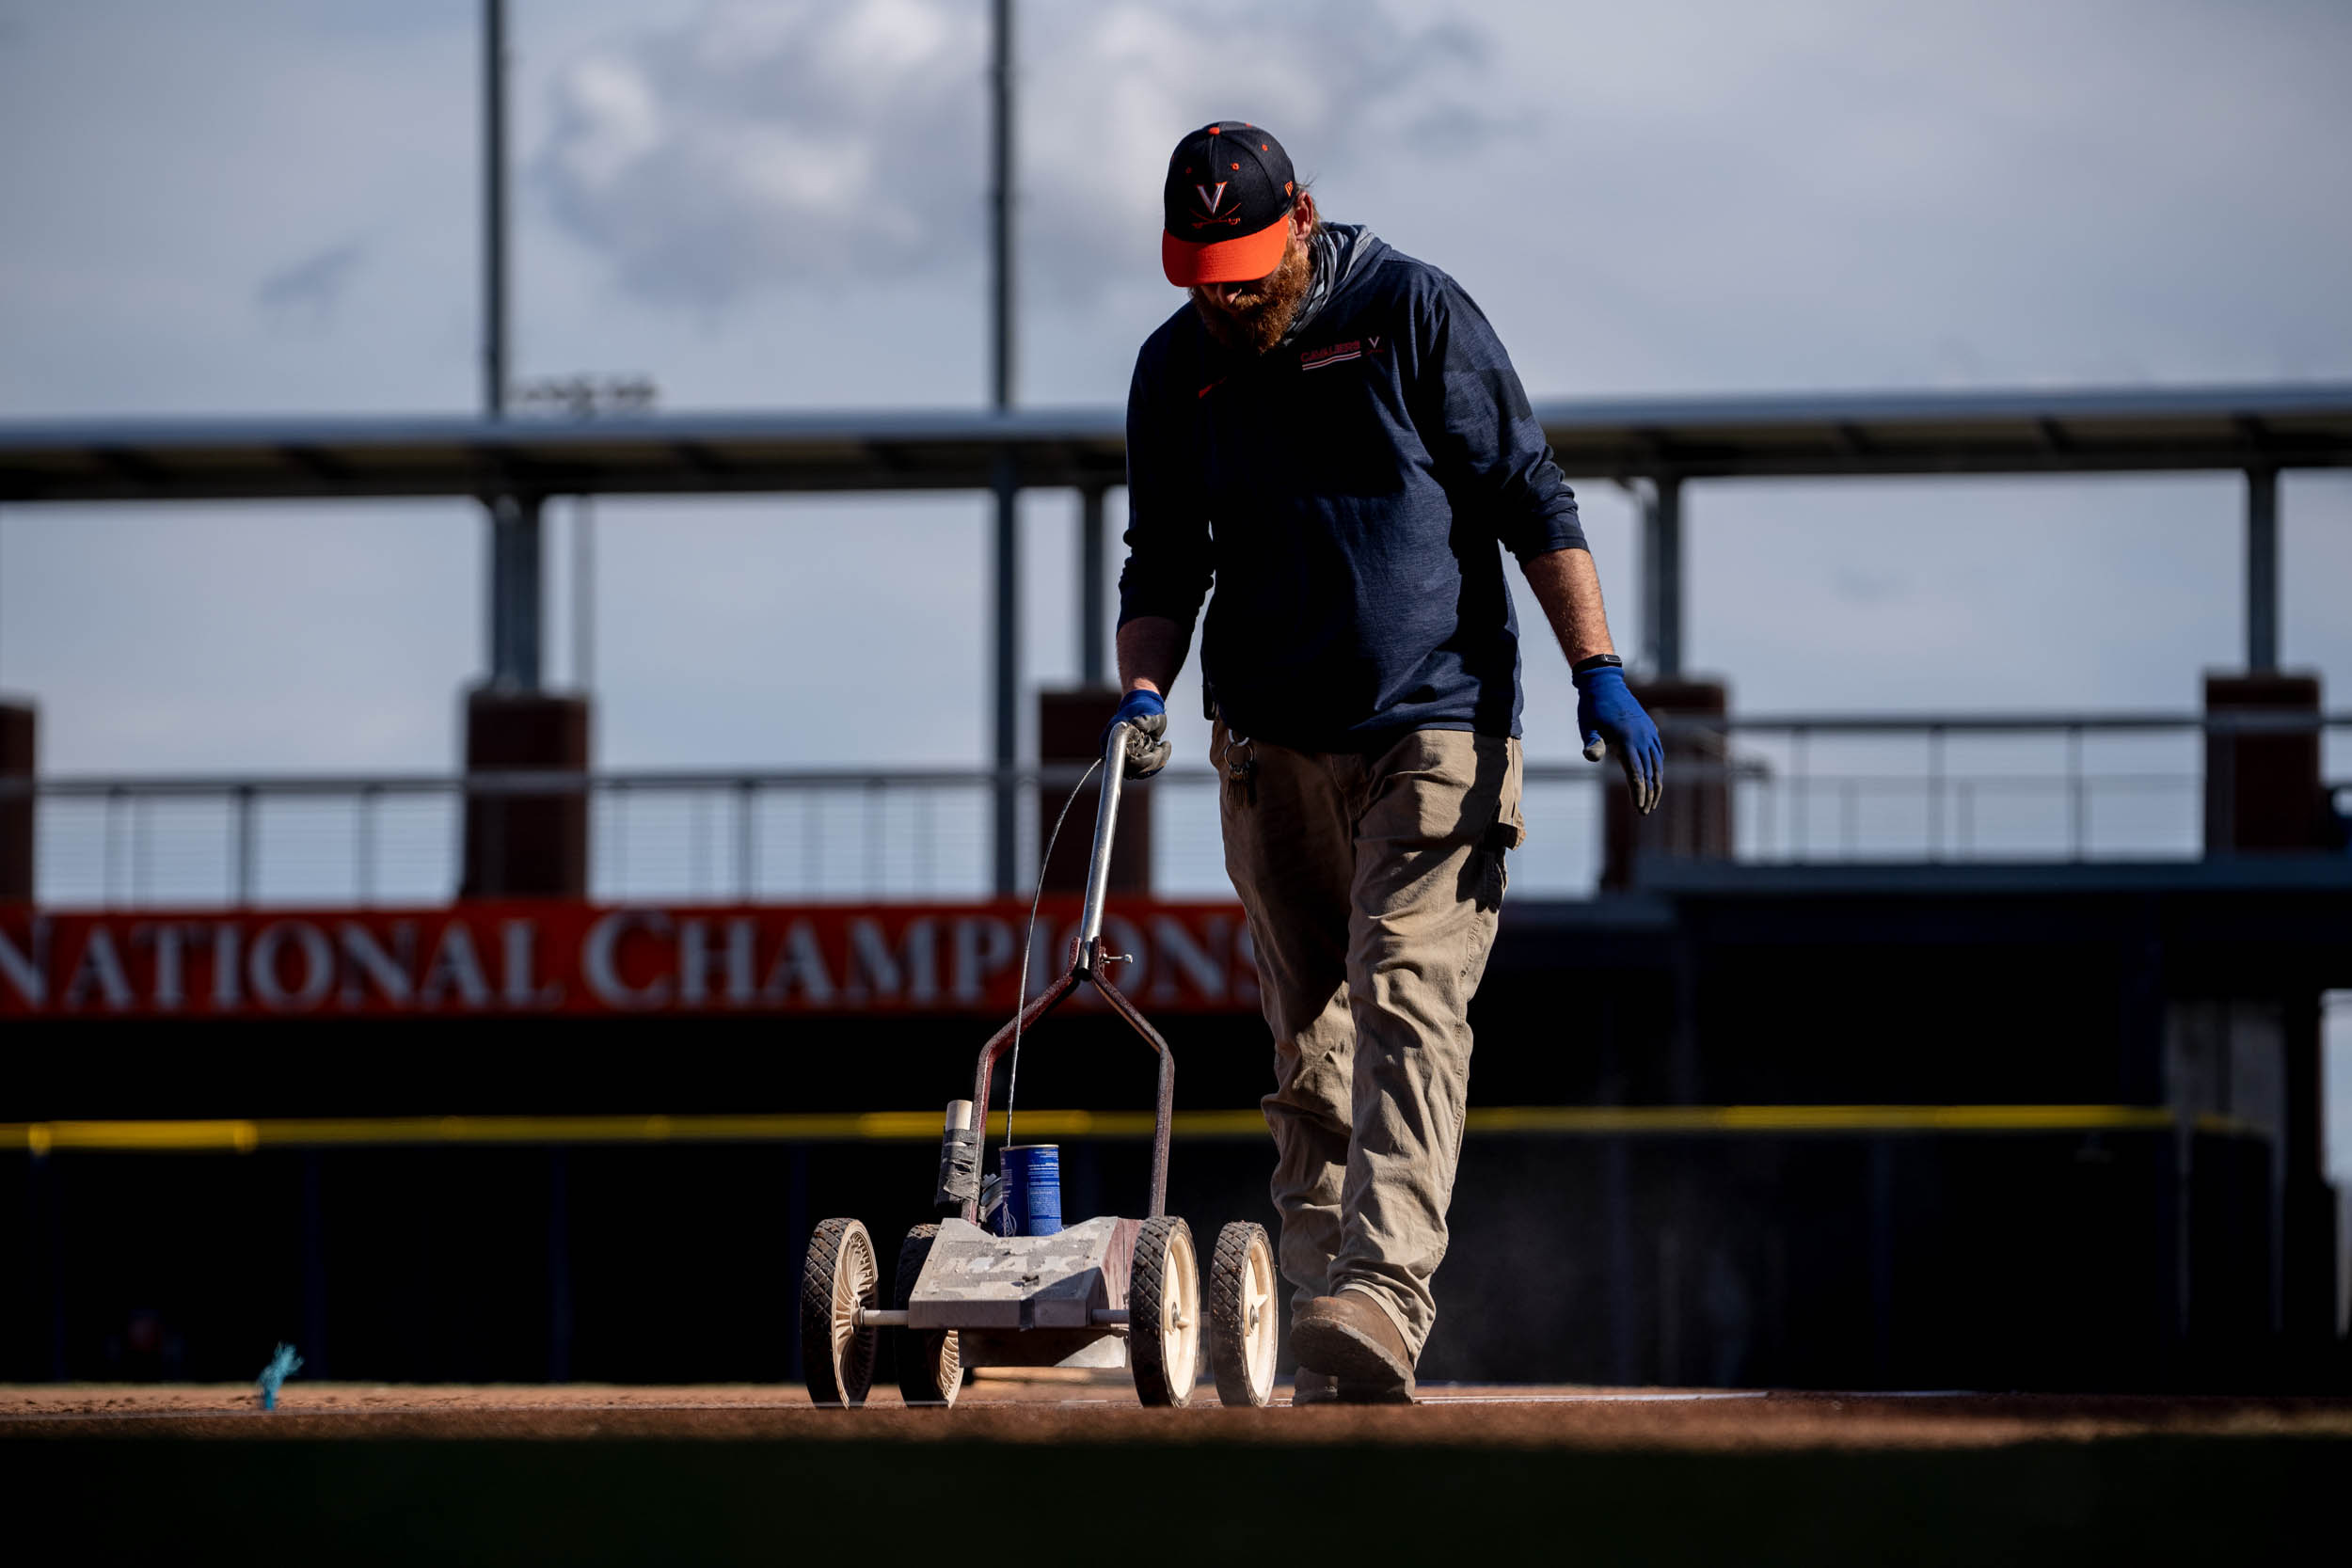 UVA Staff Member pushing a spray paint machine to mark the lines on the baseball field